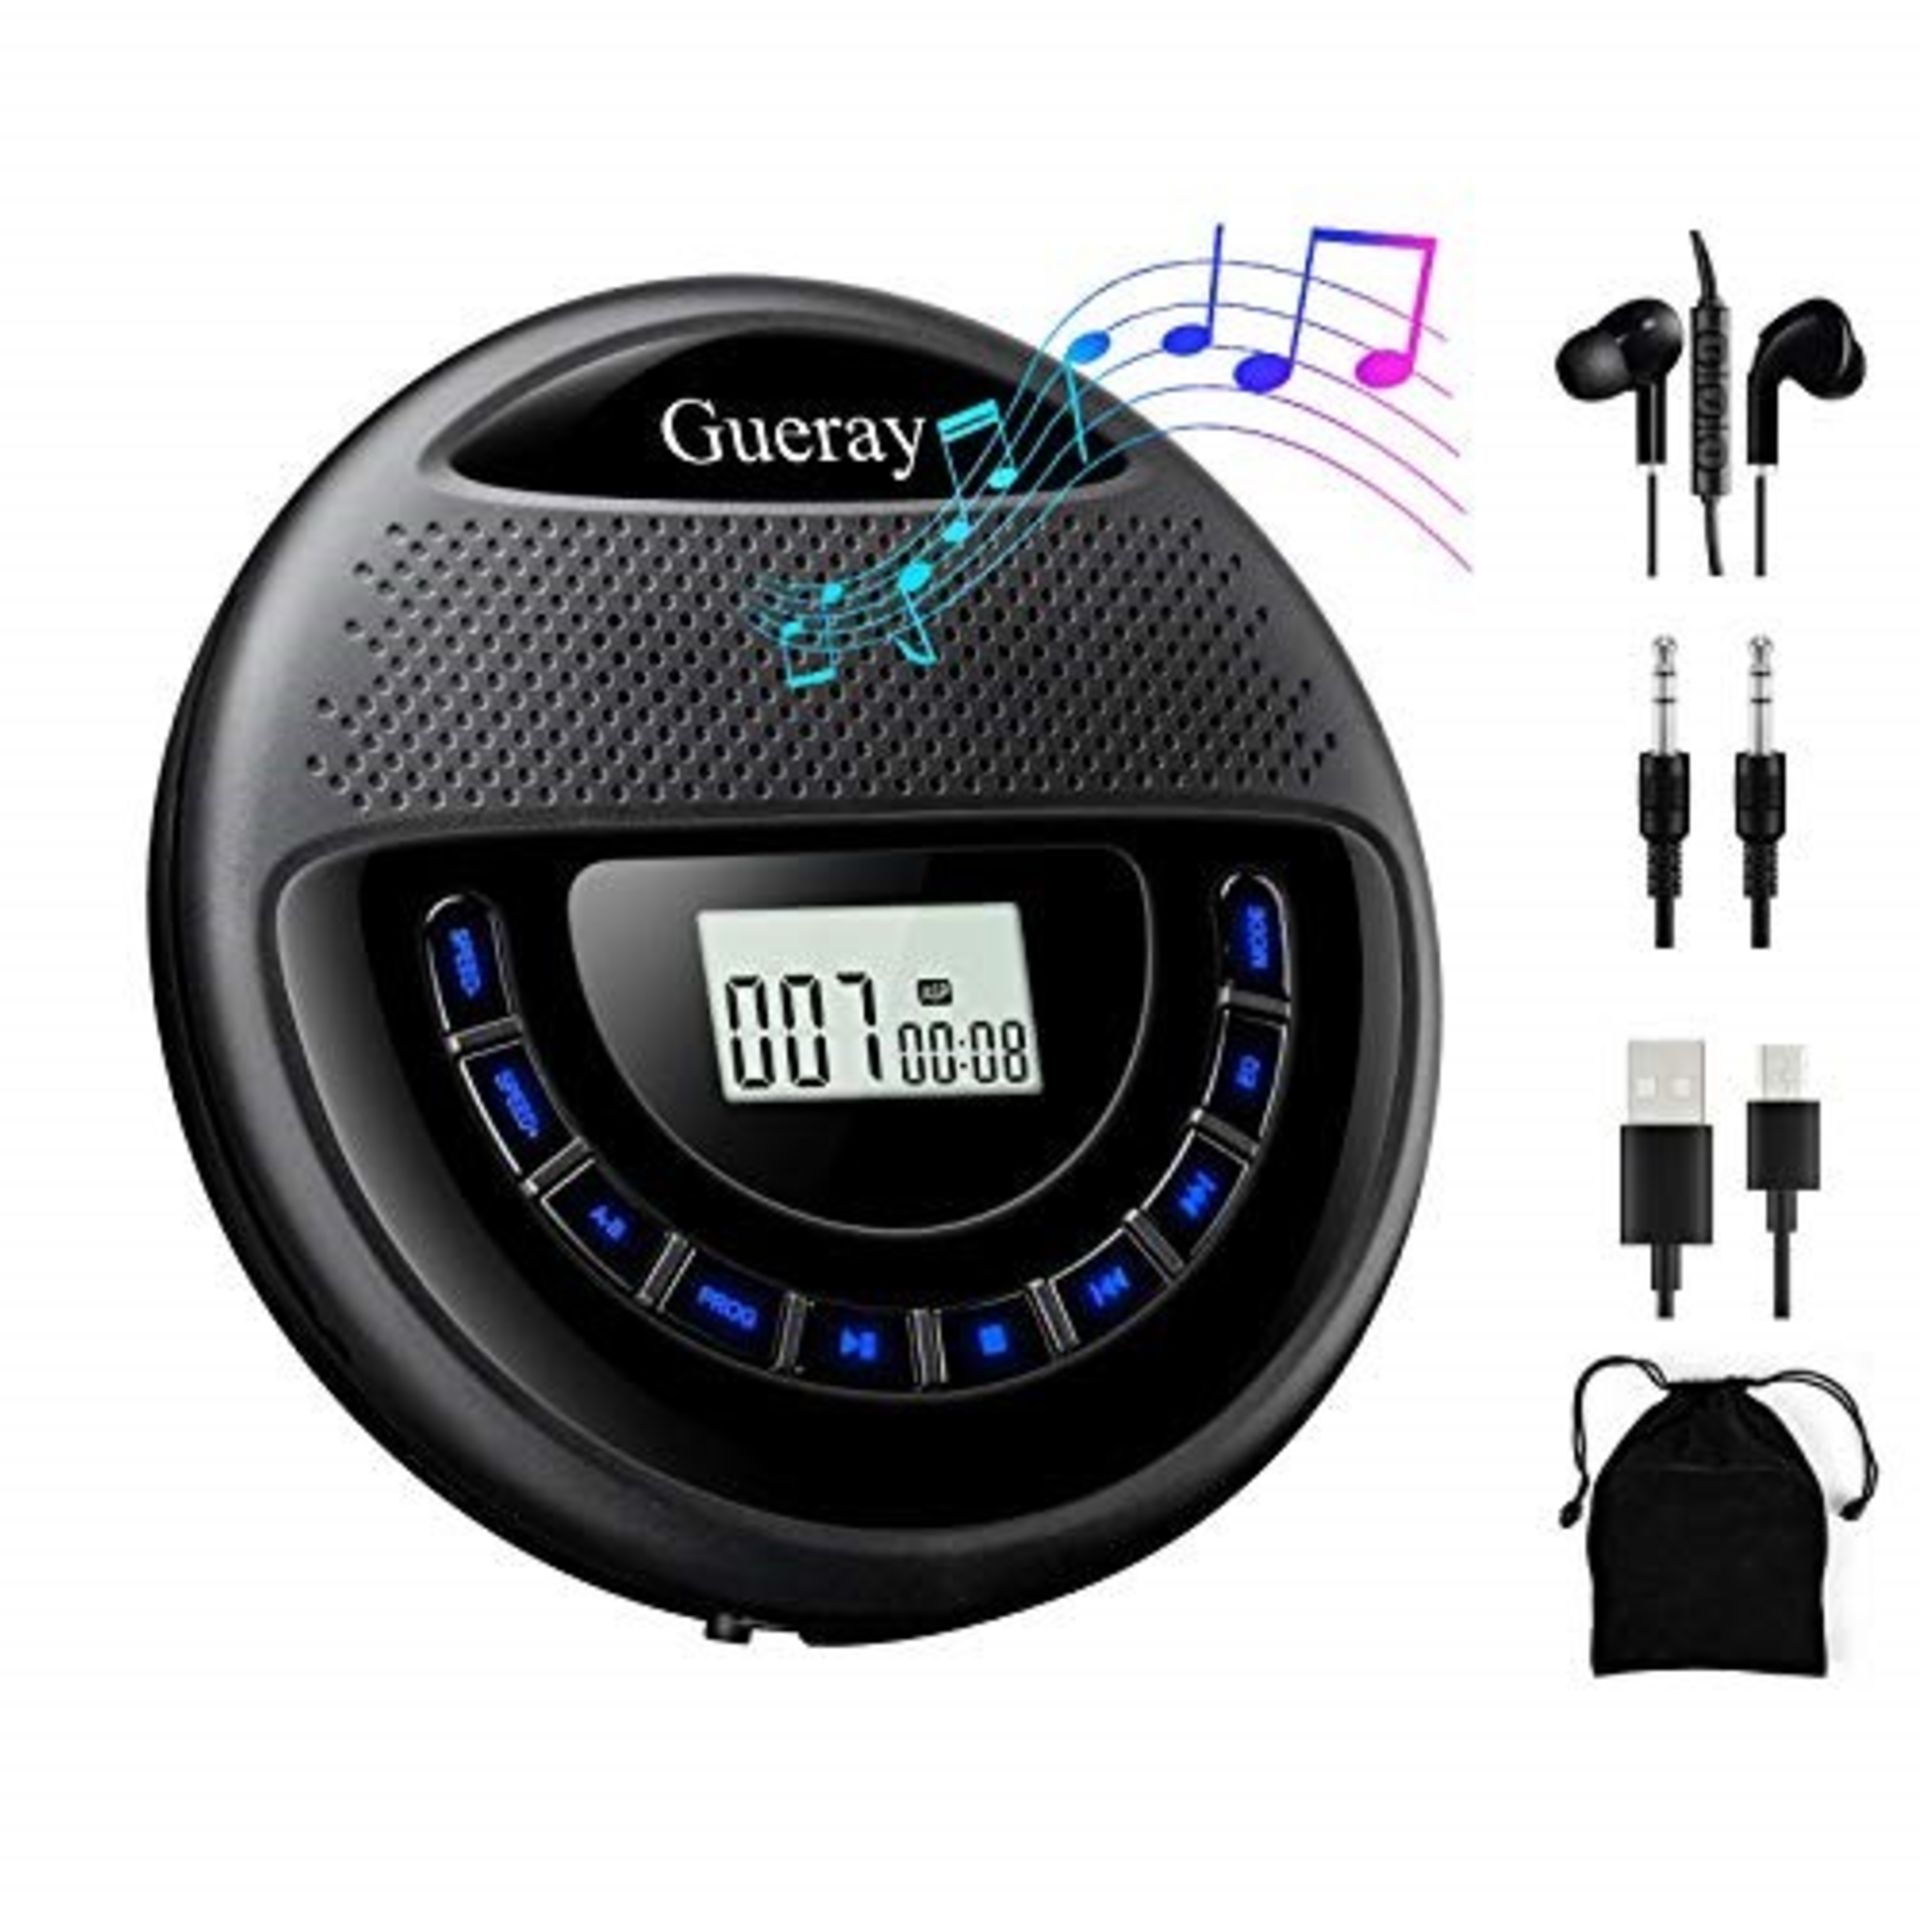 Gueray CD Player Portable with Speaker & Headpho